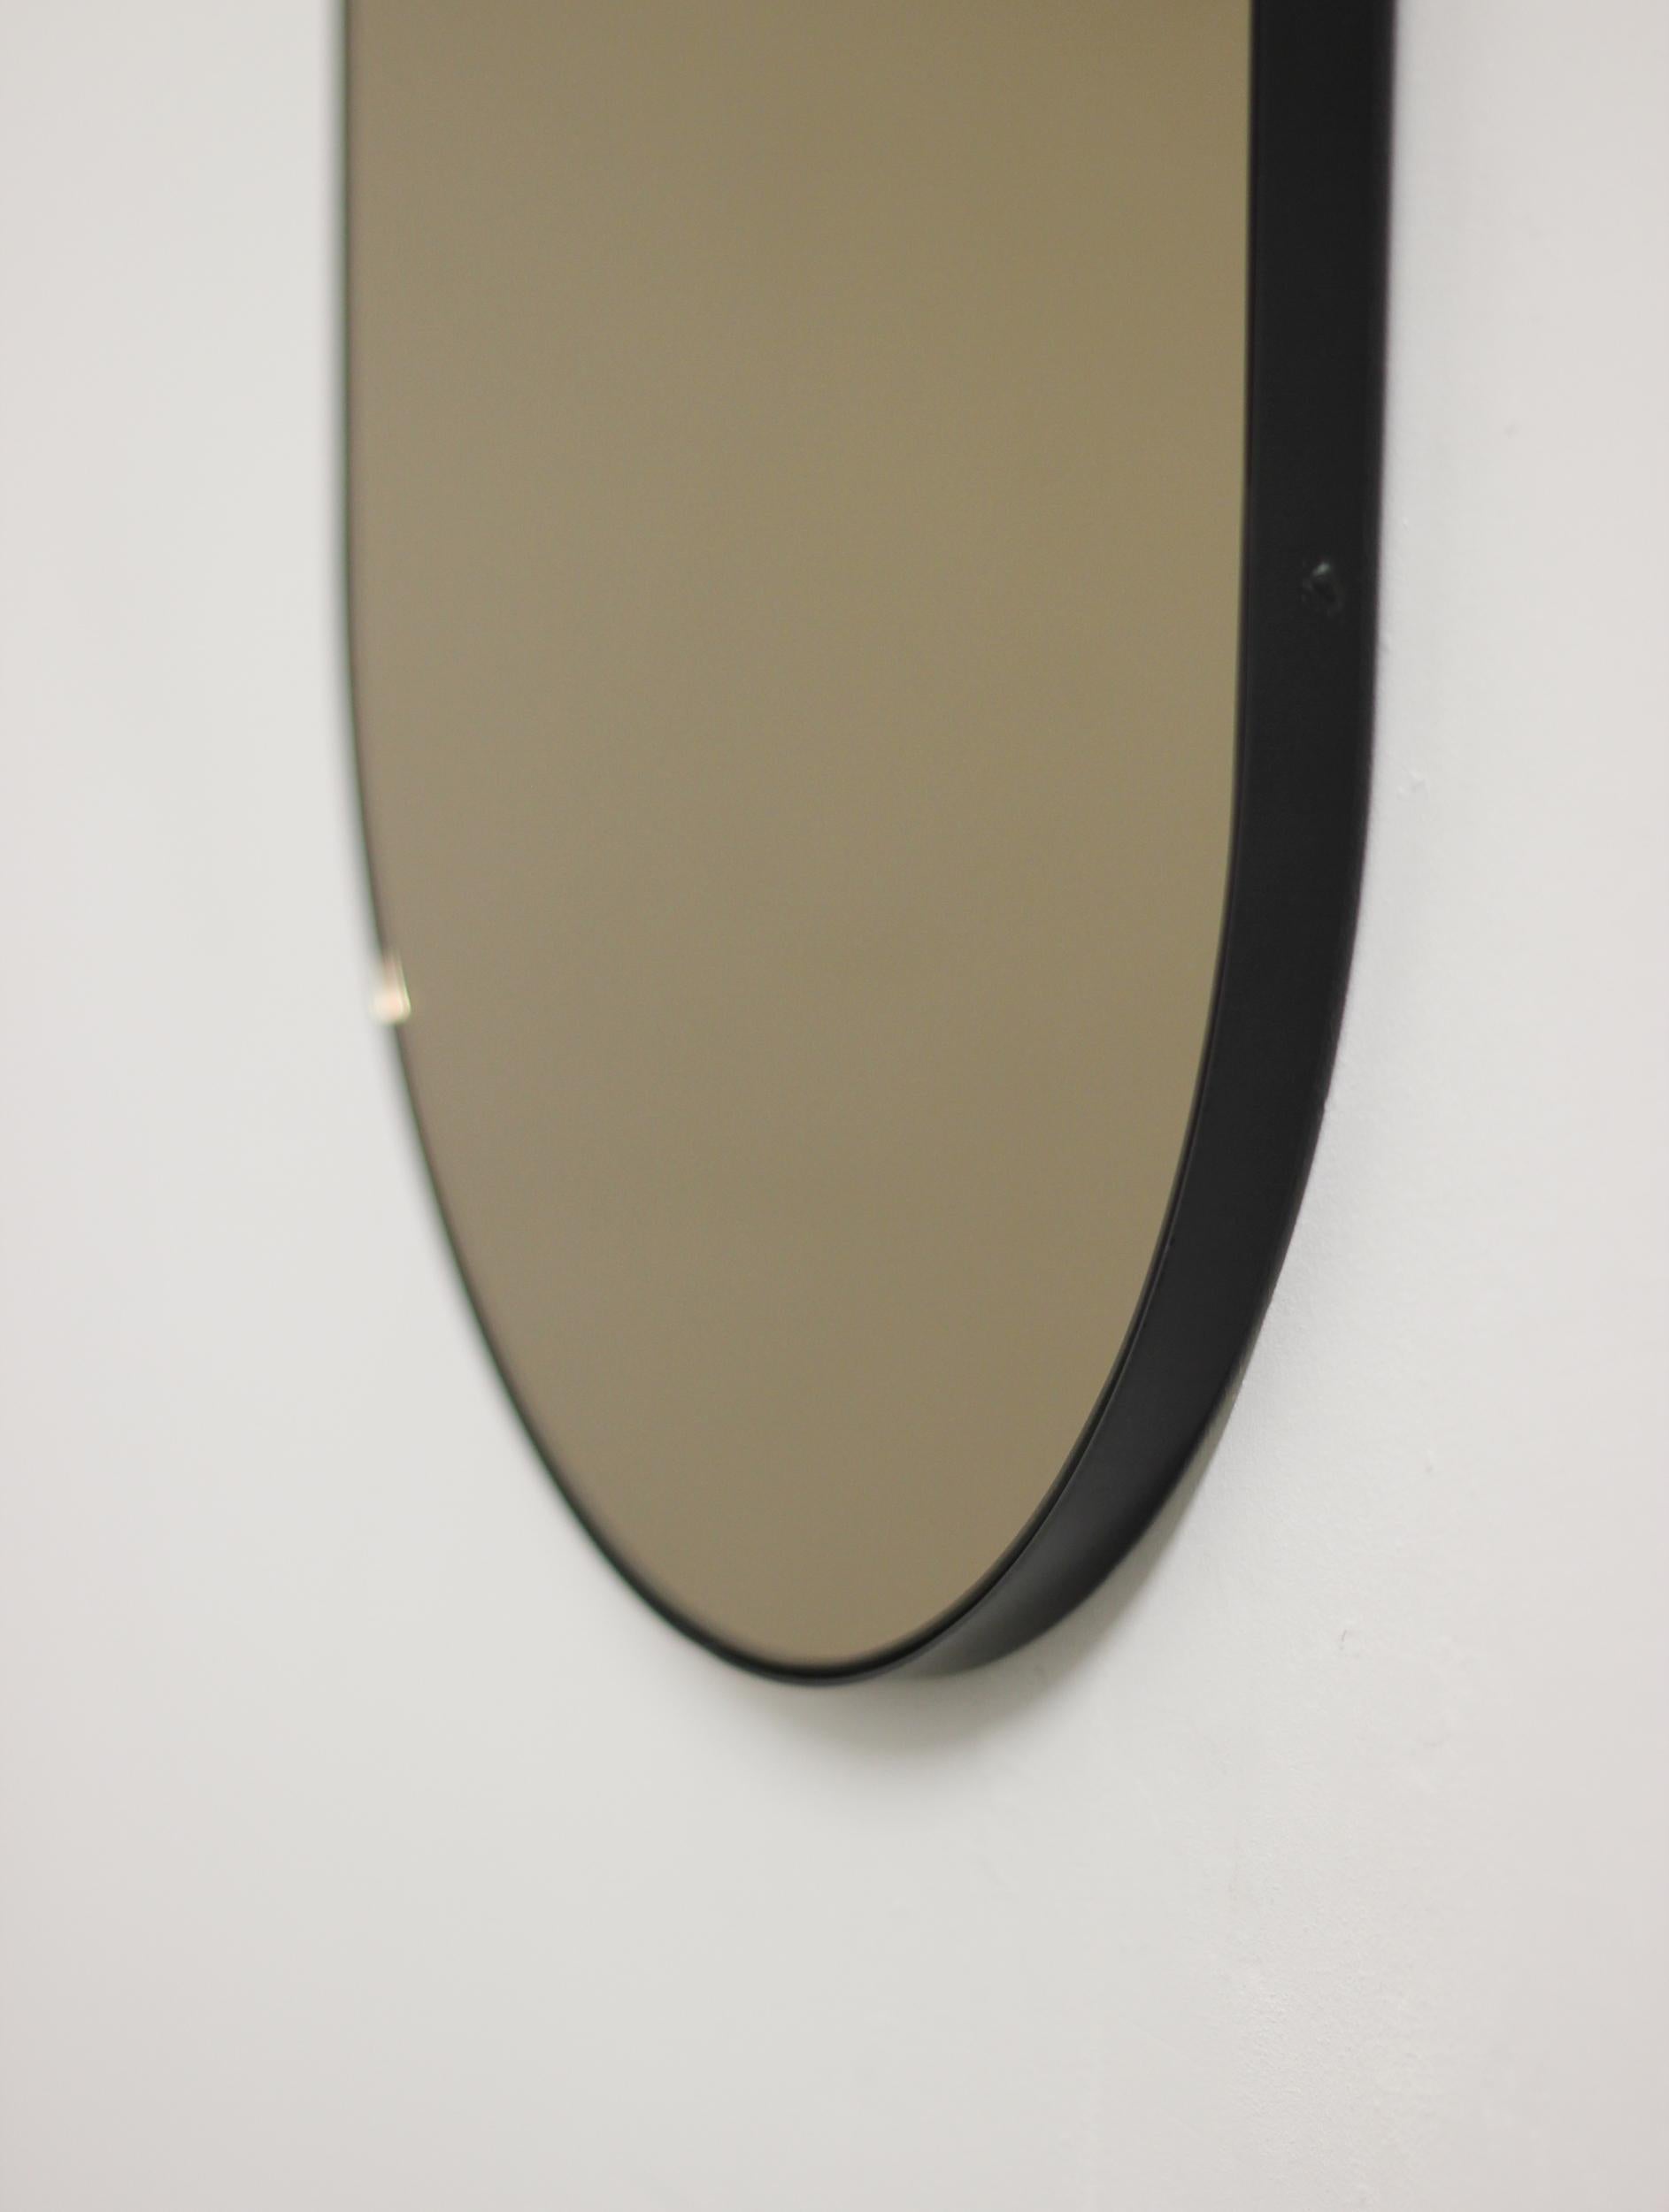 Capsula Capsule shaped Bronze Contemporary Mirror with Black Frame, Small For Sale 2